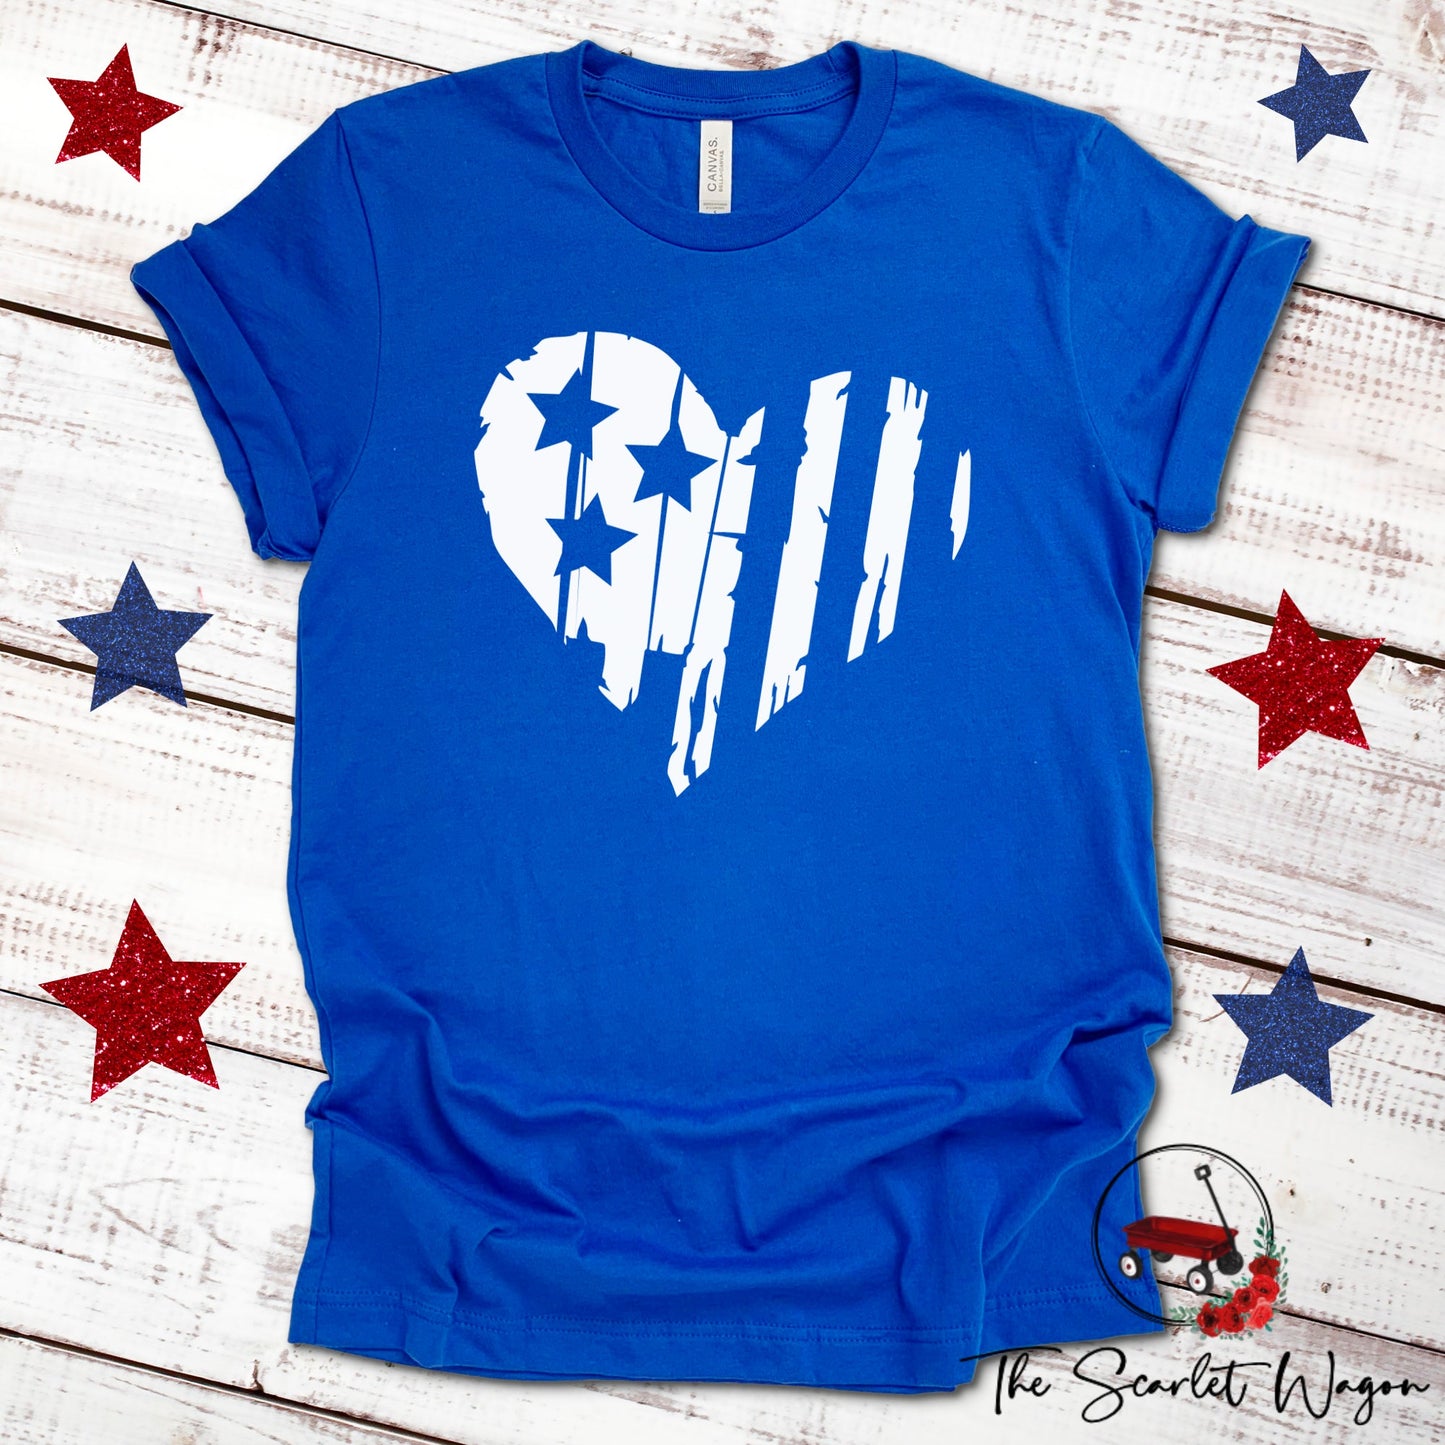 Distressed Heart-Shaped Flag Unisex Tee Patriotic Shirt The Scarlet Wagon Boutique Royal Blue XS 